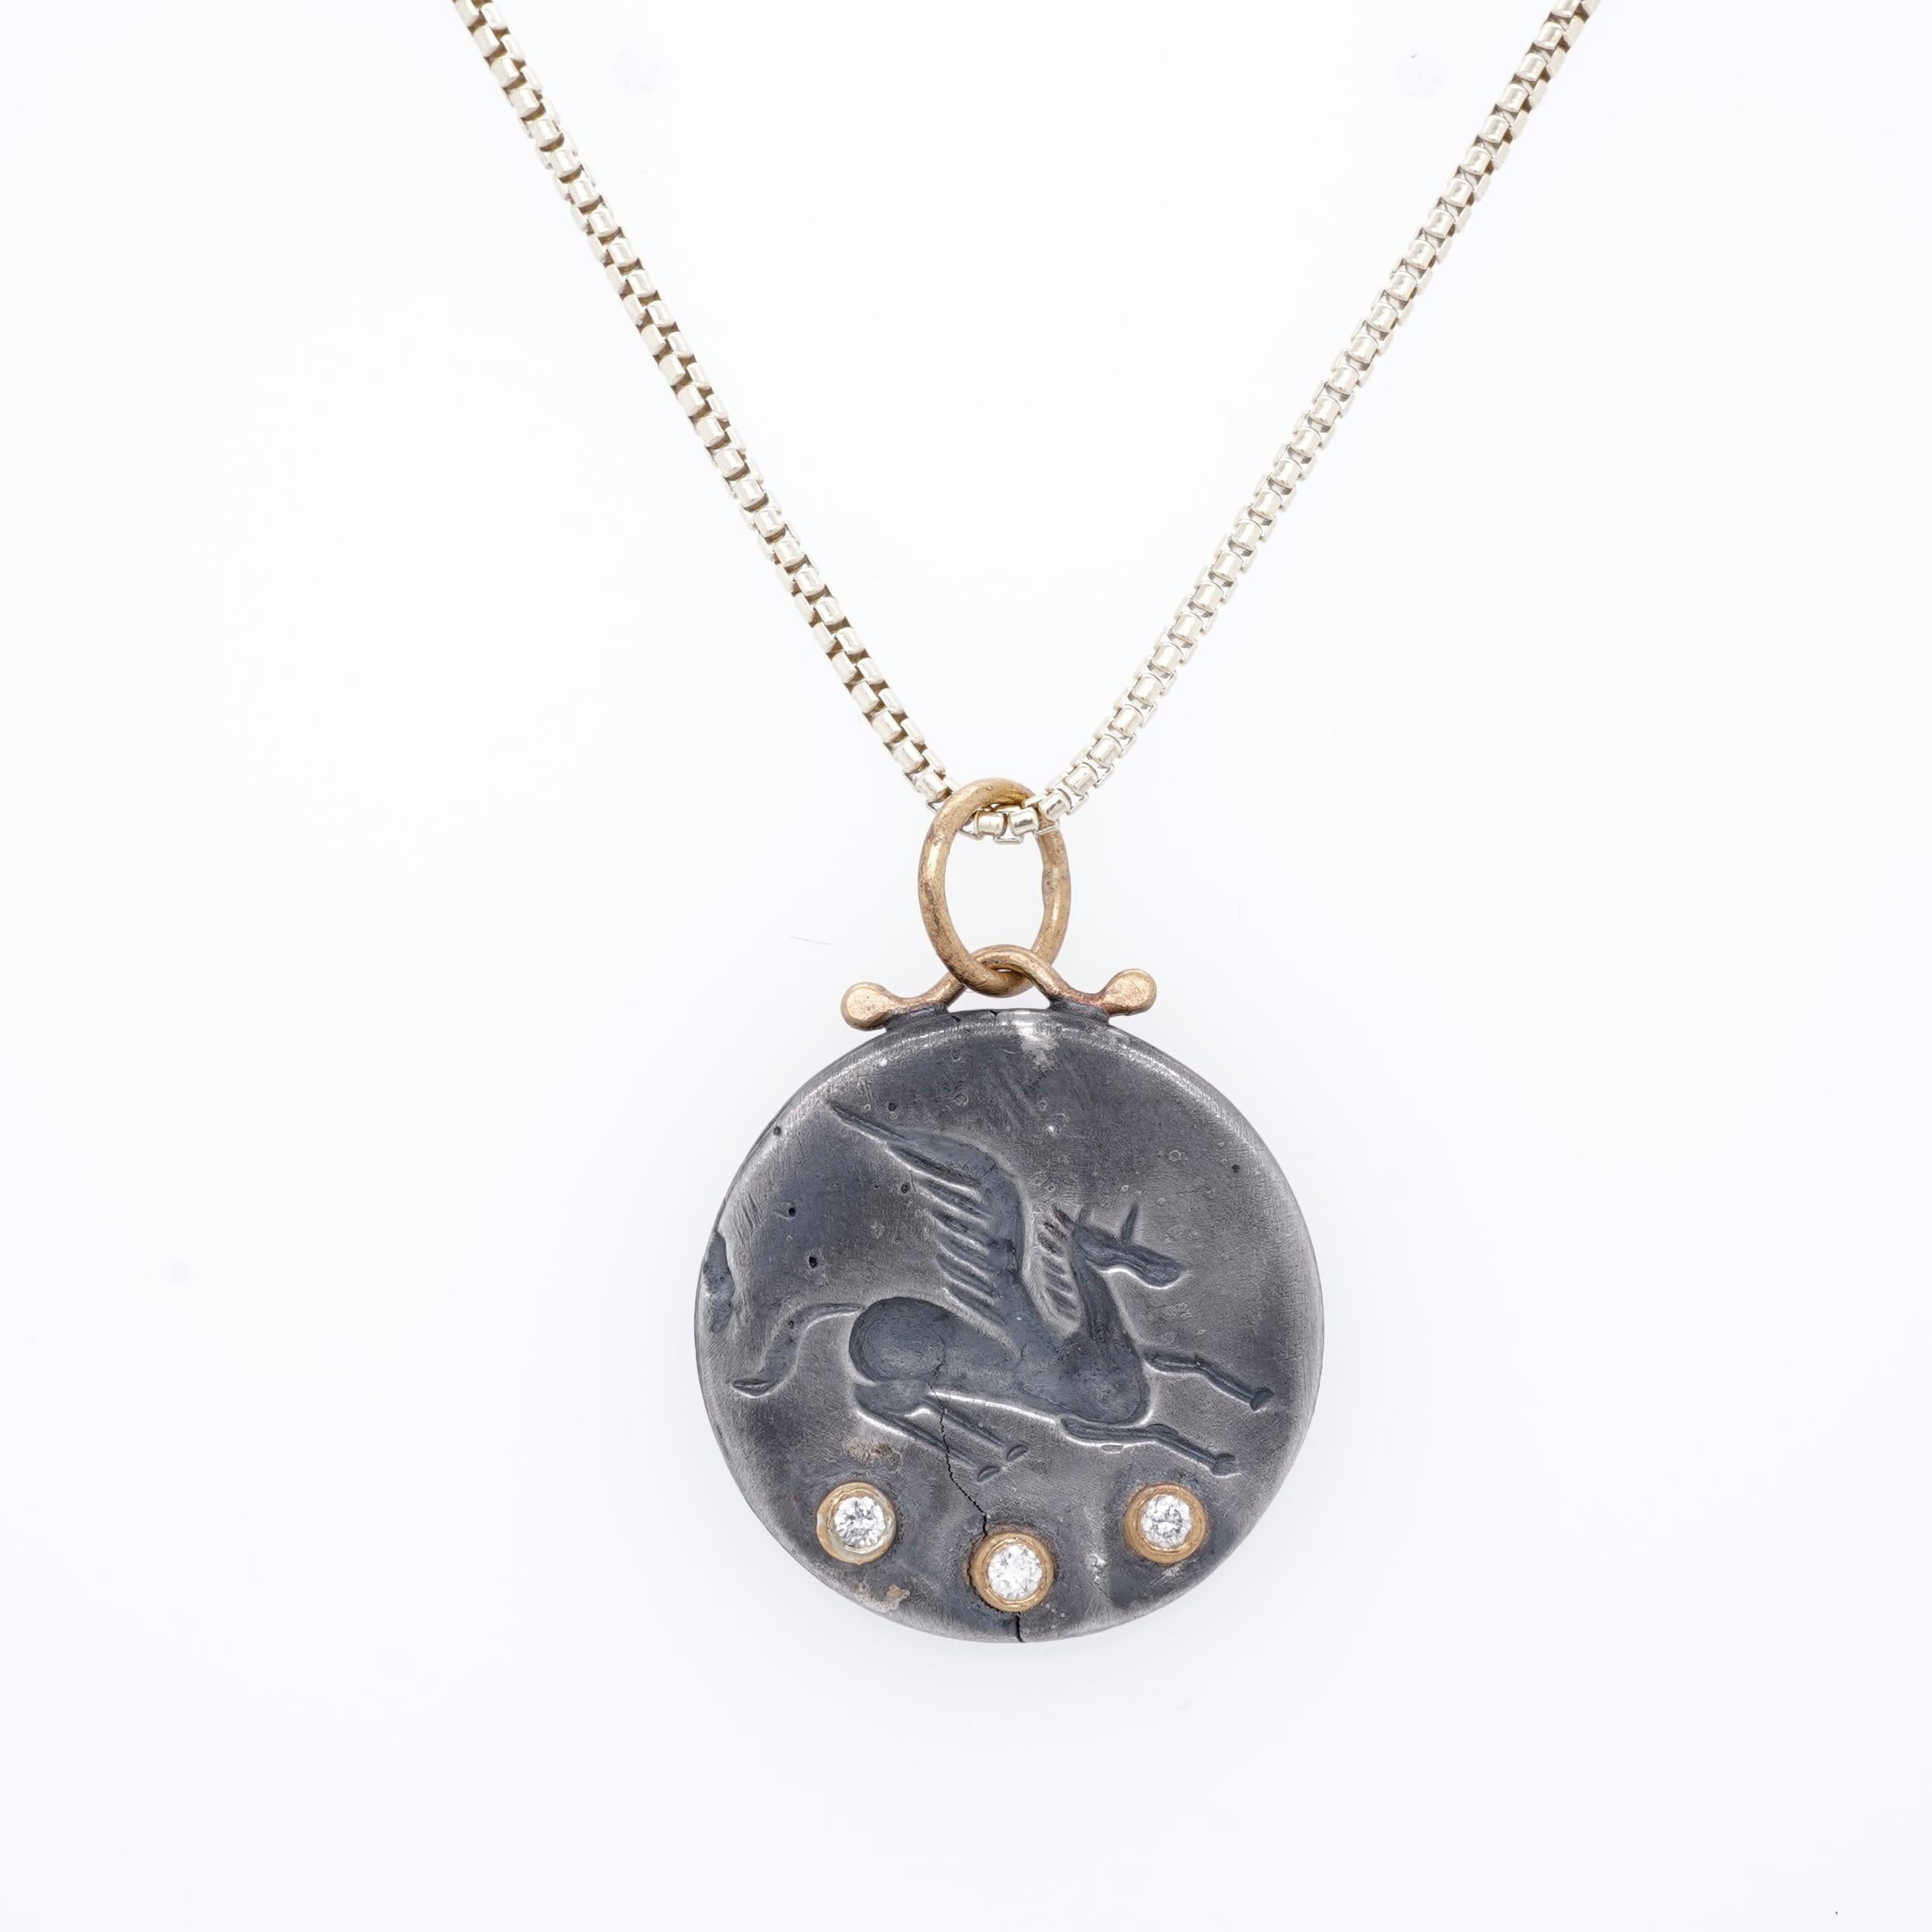 Contemporary Medium Pegasus Coin Charm Amulet Pendant Necklace with Three Diamonds, 24kt Gold